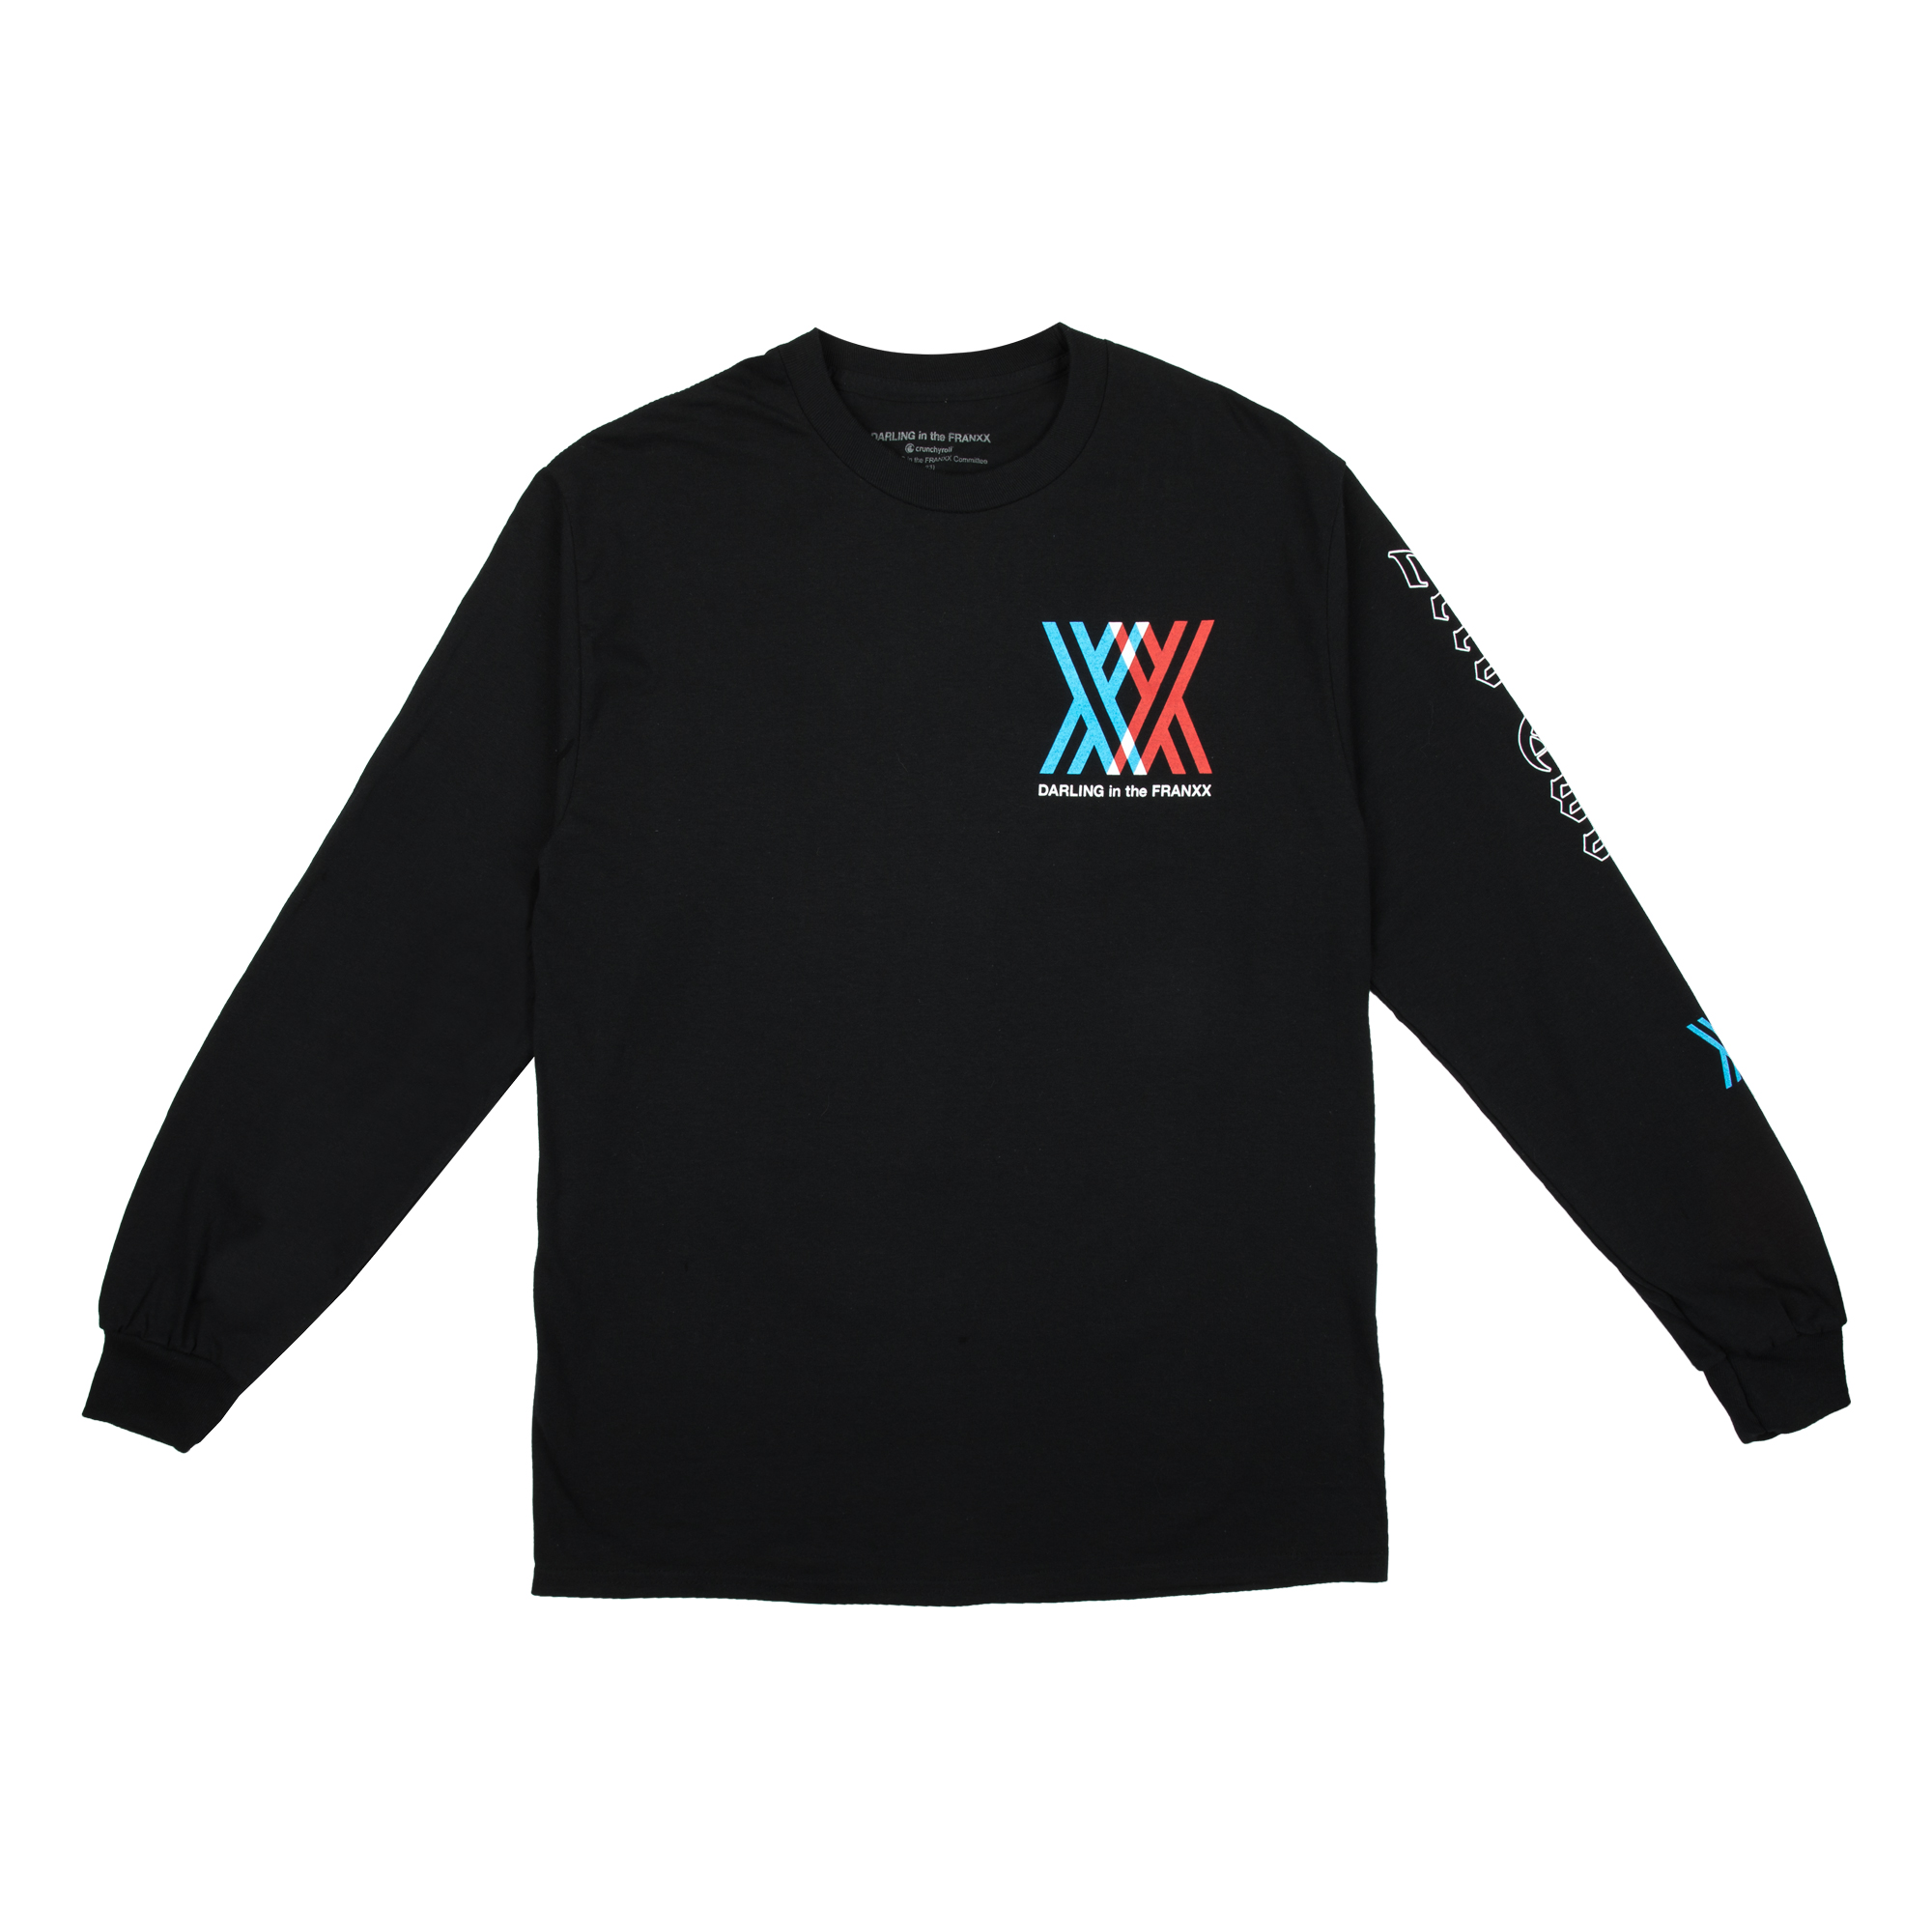 DARLING in the FRANXX - Zero Two Faces Long Sleeve - Crunchyroll Exclusive! image count 1